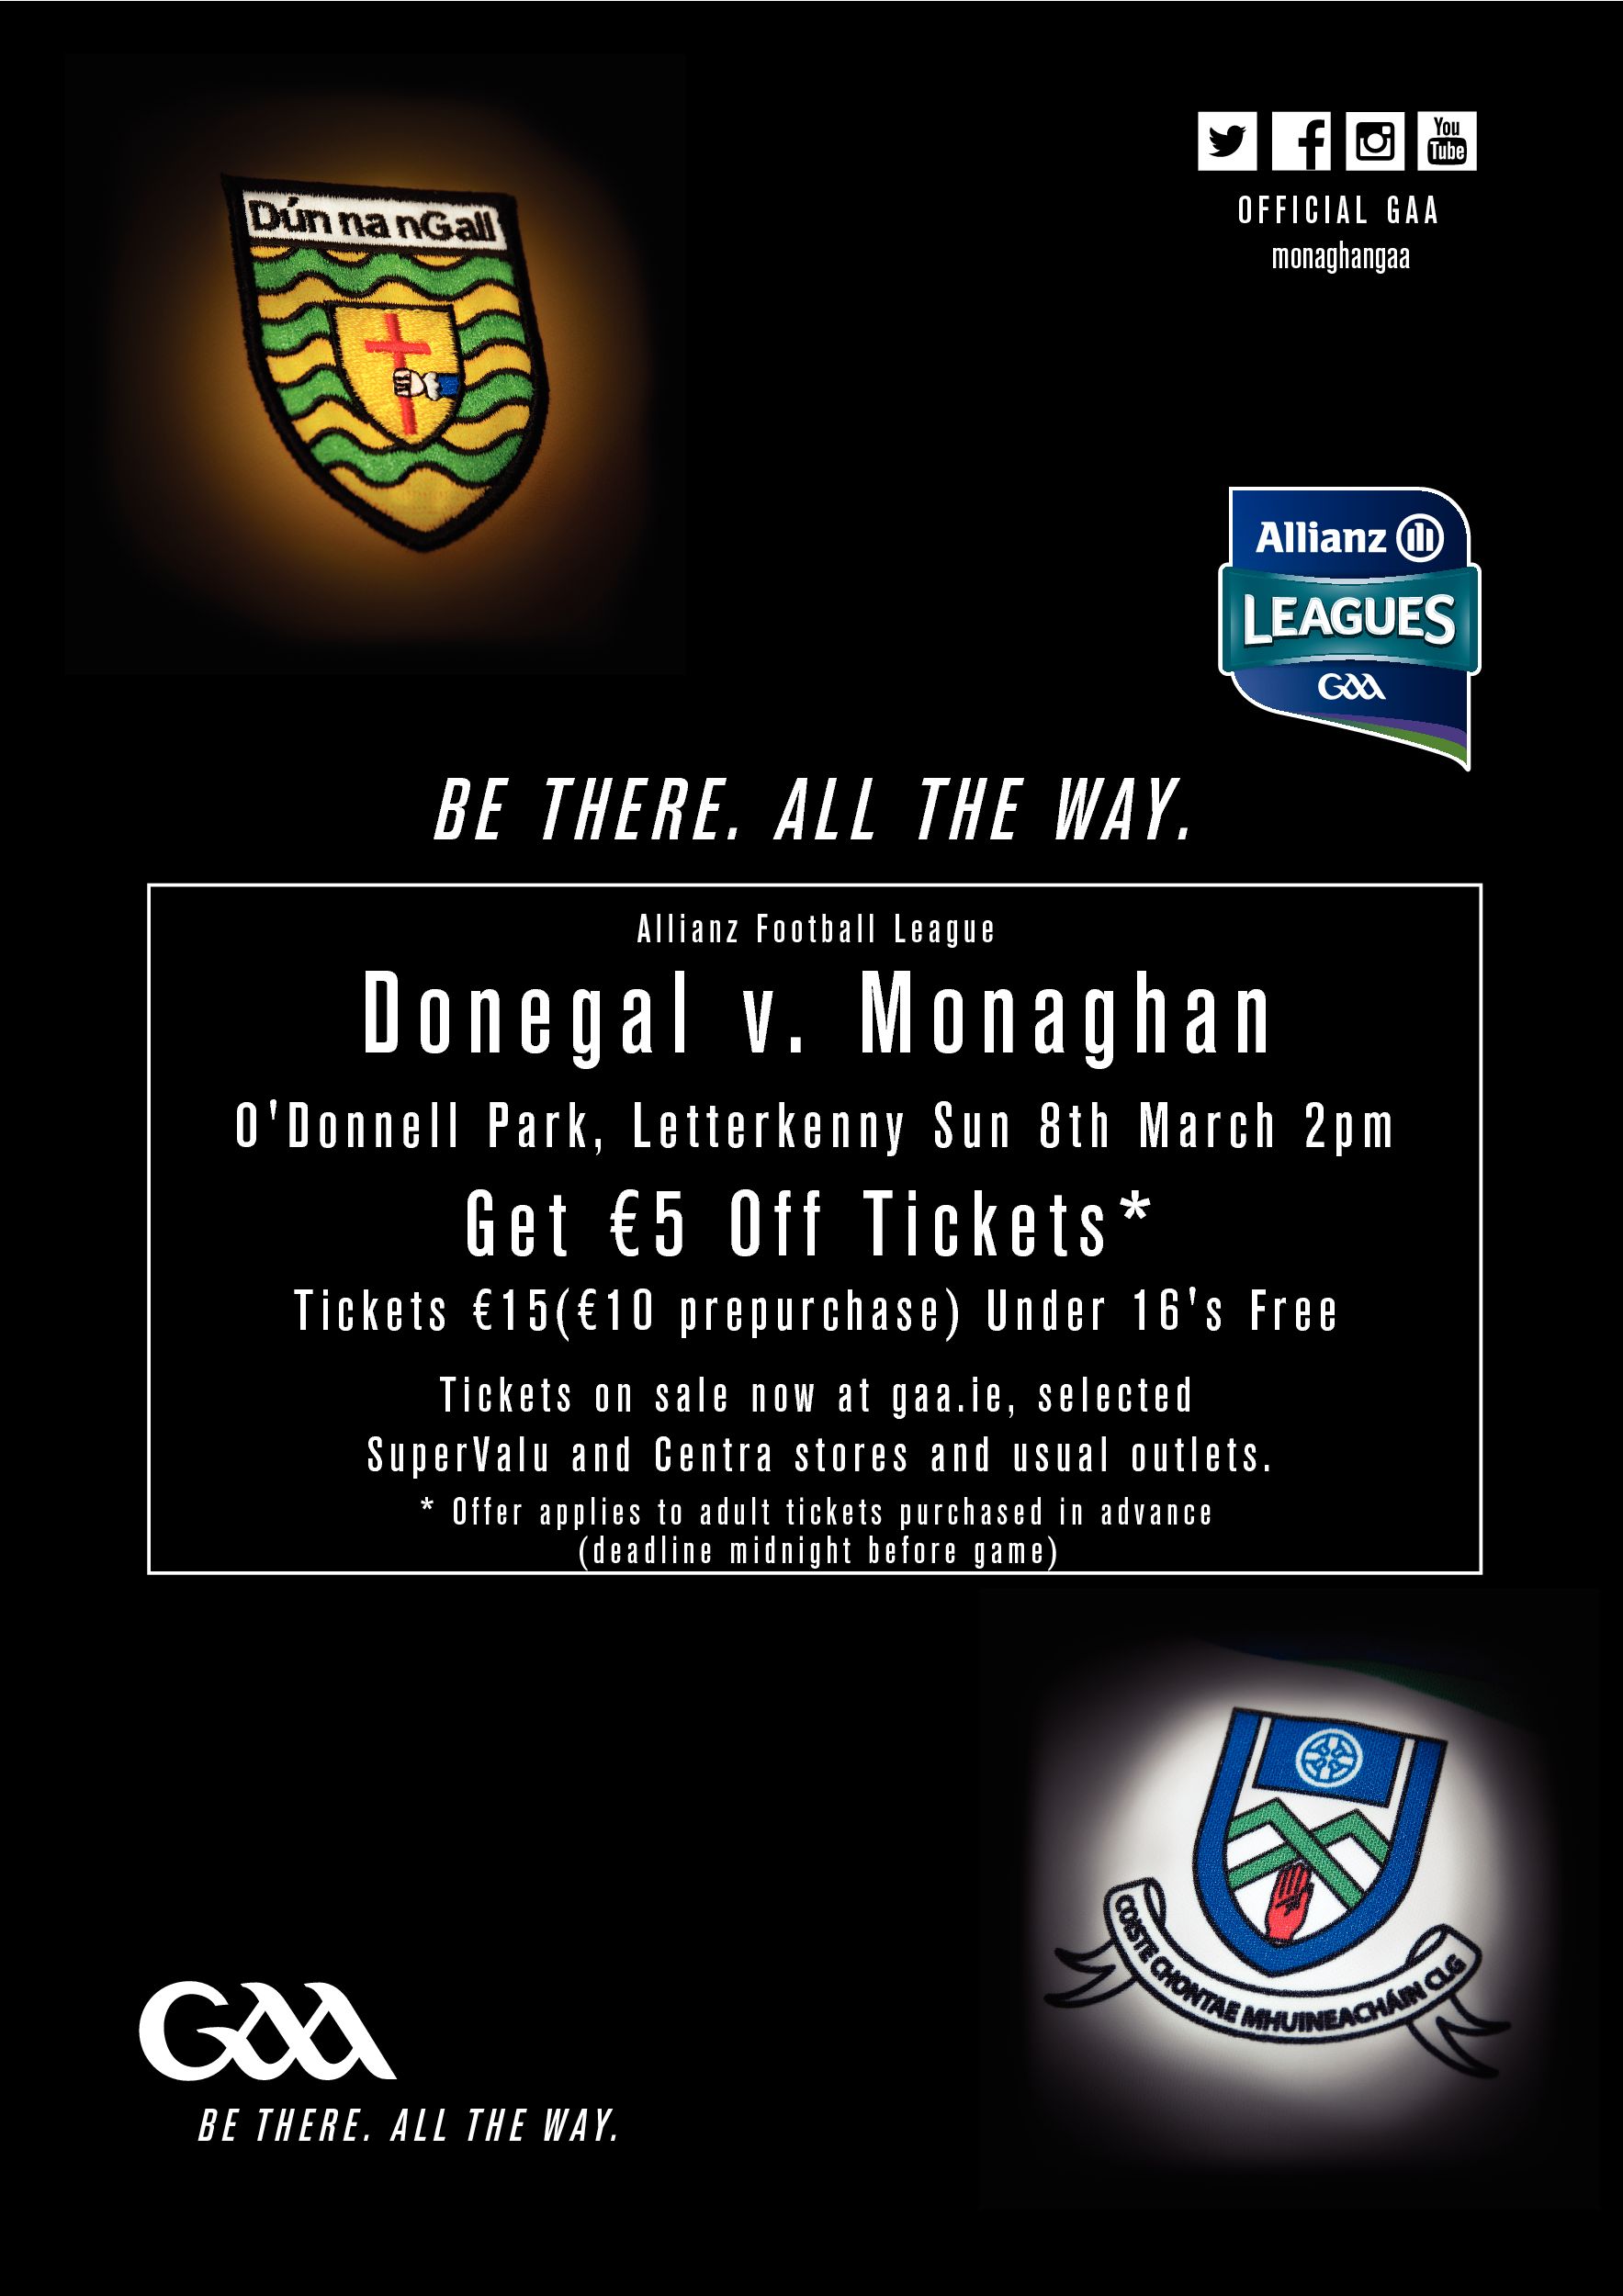 Monaghan Team v Donegal – Sunday 8th March 2pm